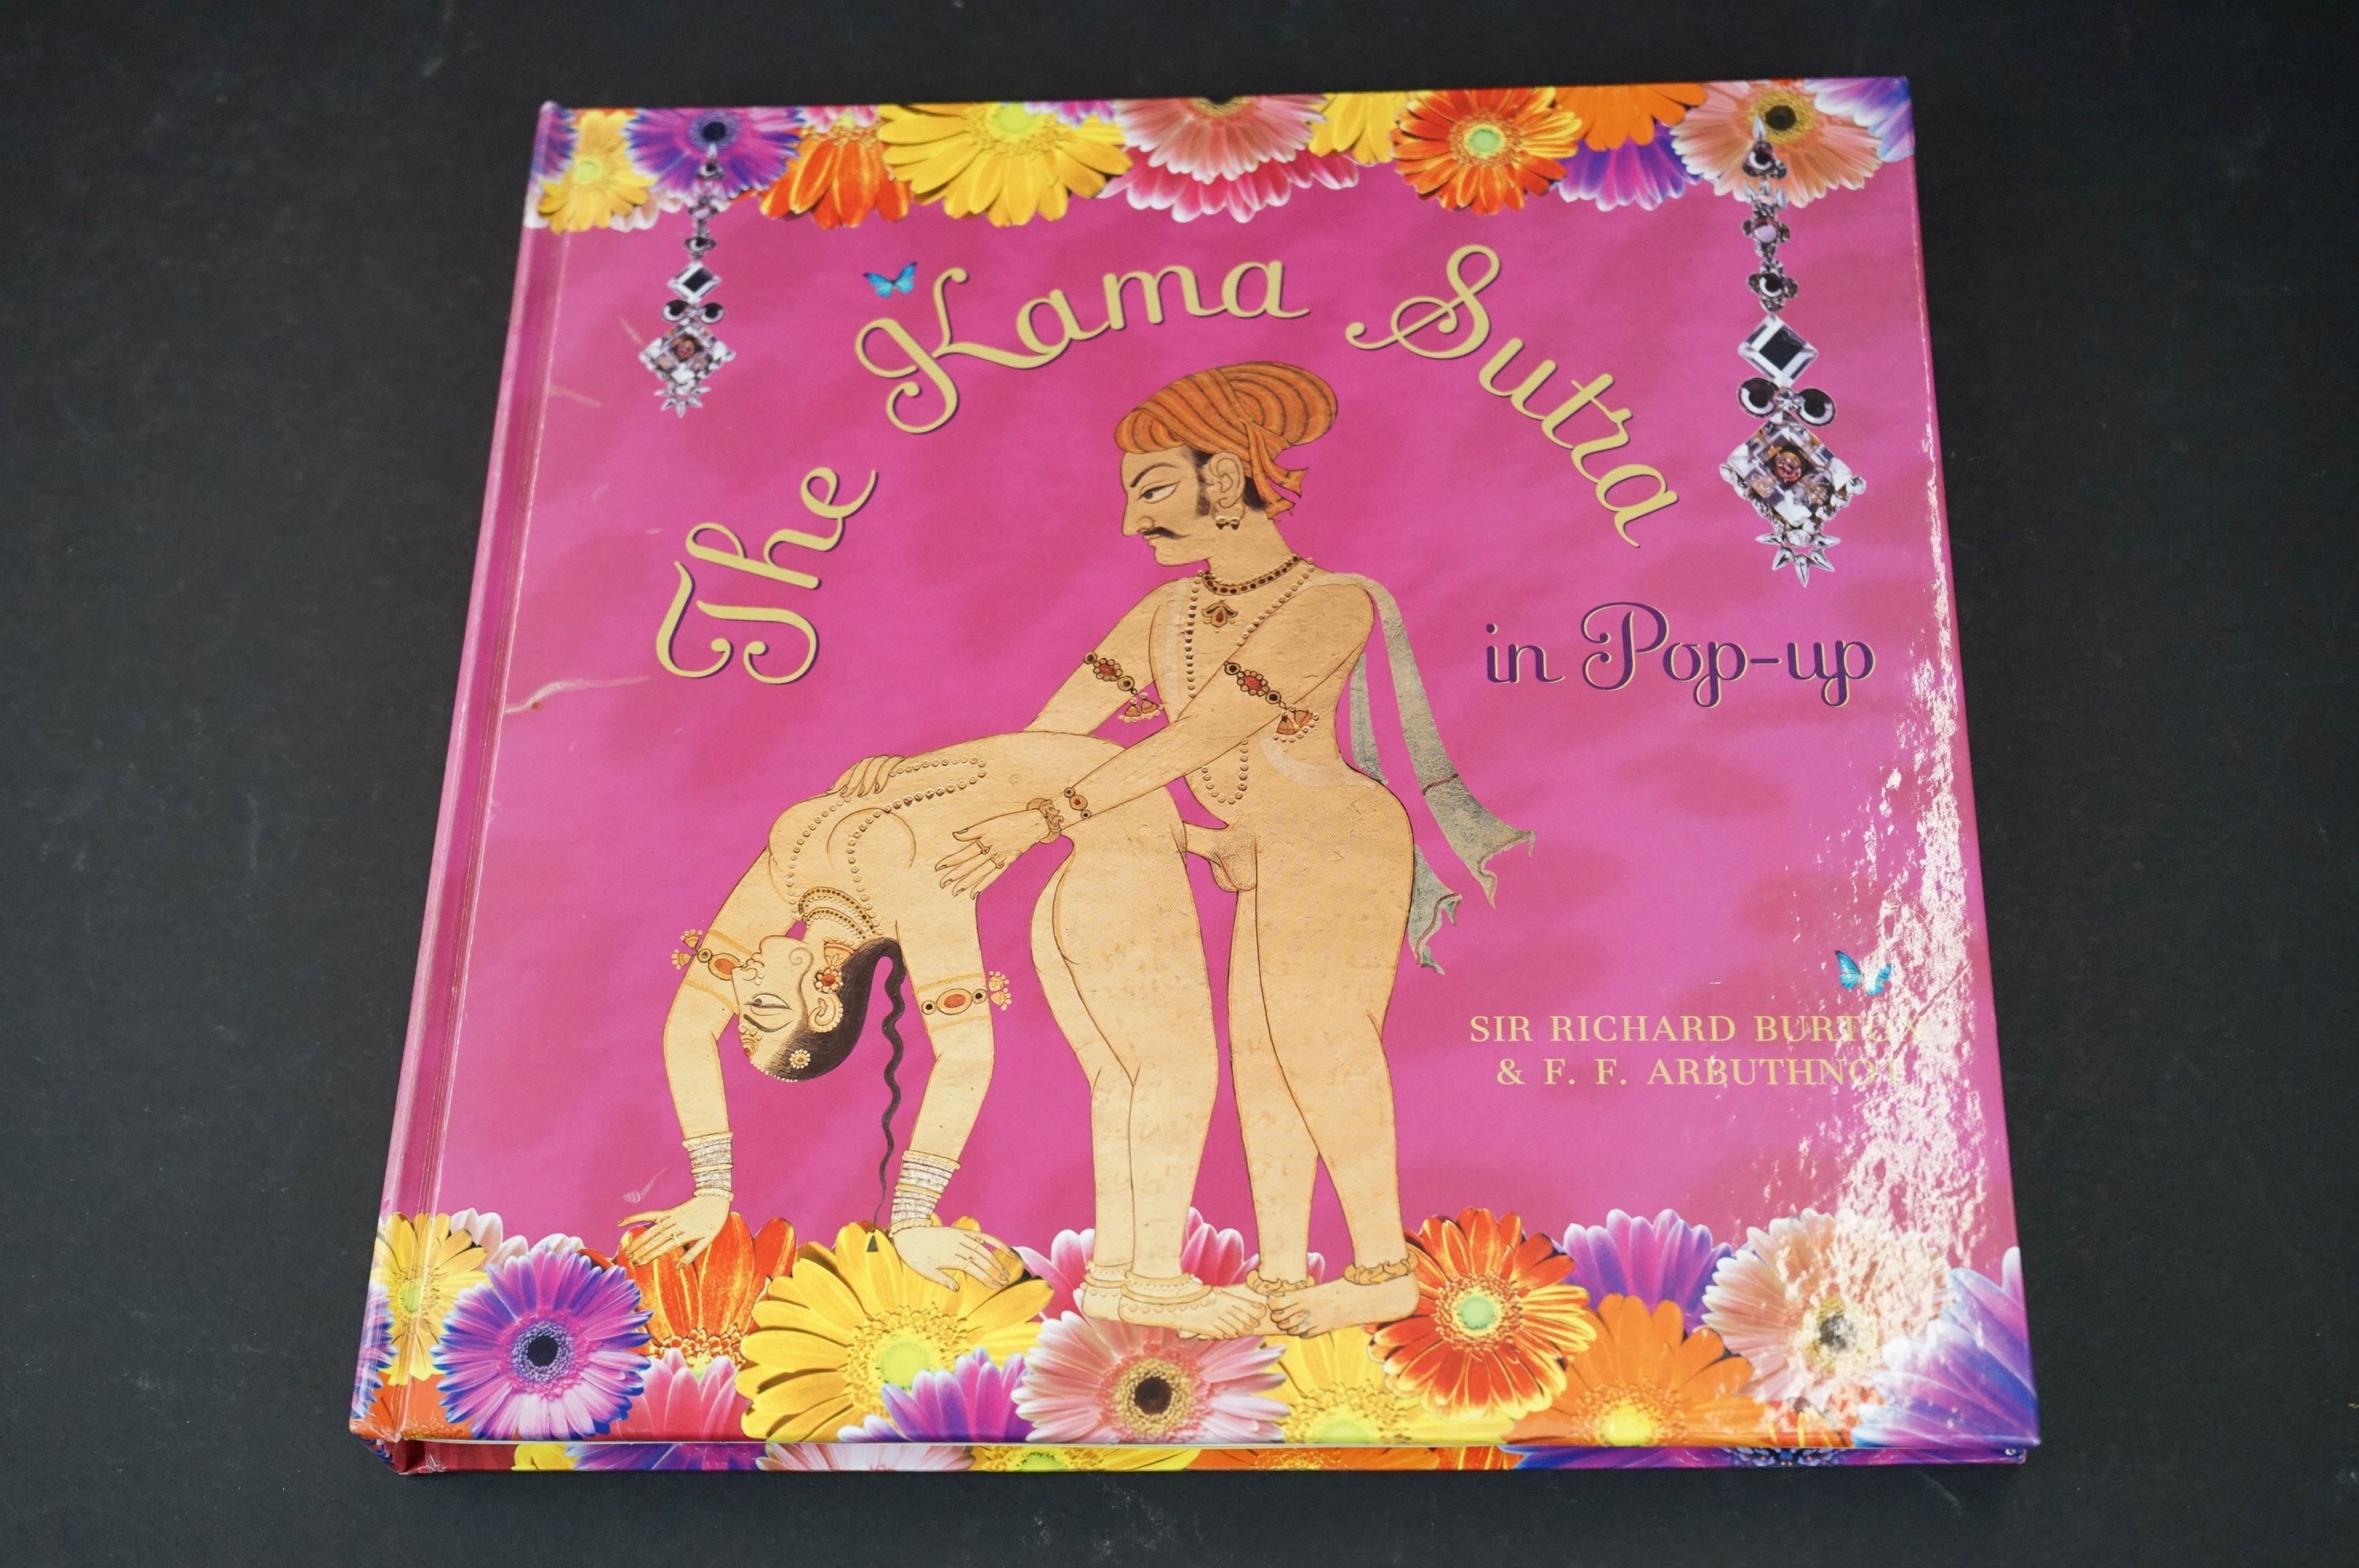 Two Kama Sutra Pop Up Books, one with 6 paper-engineered variations by Sir Richard Burton & F.F. - Image 2 of 3